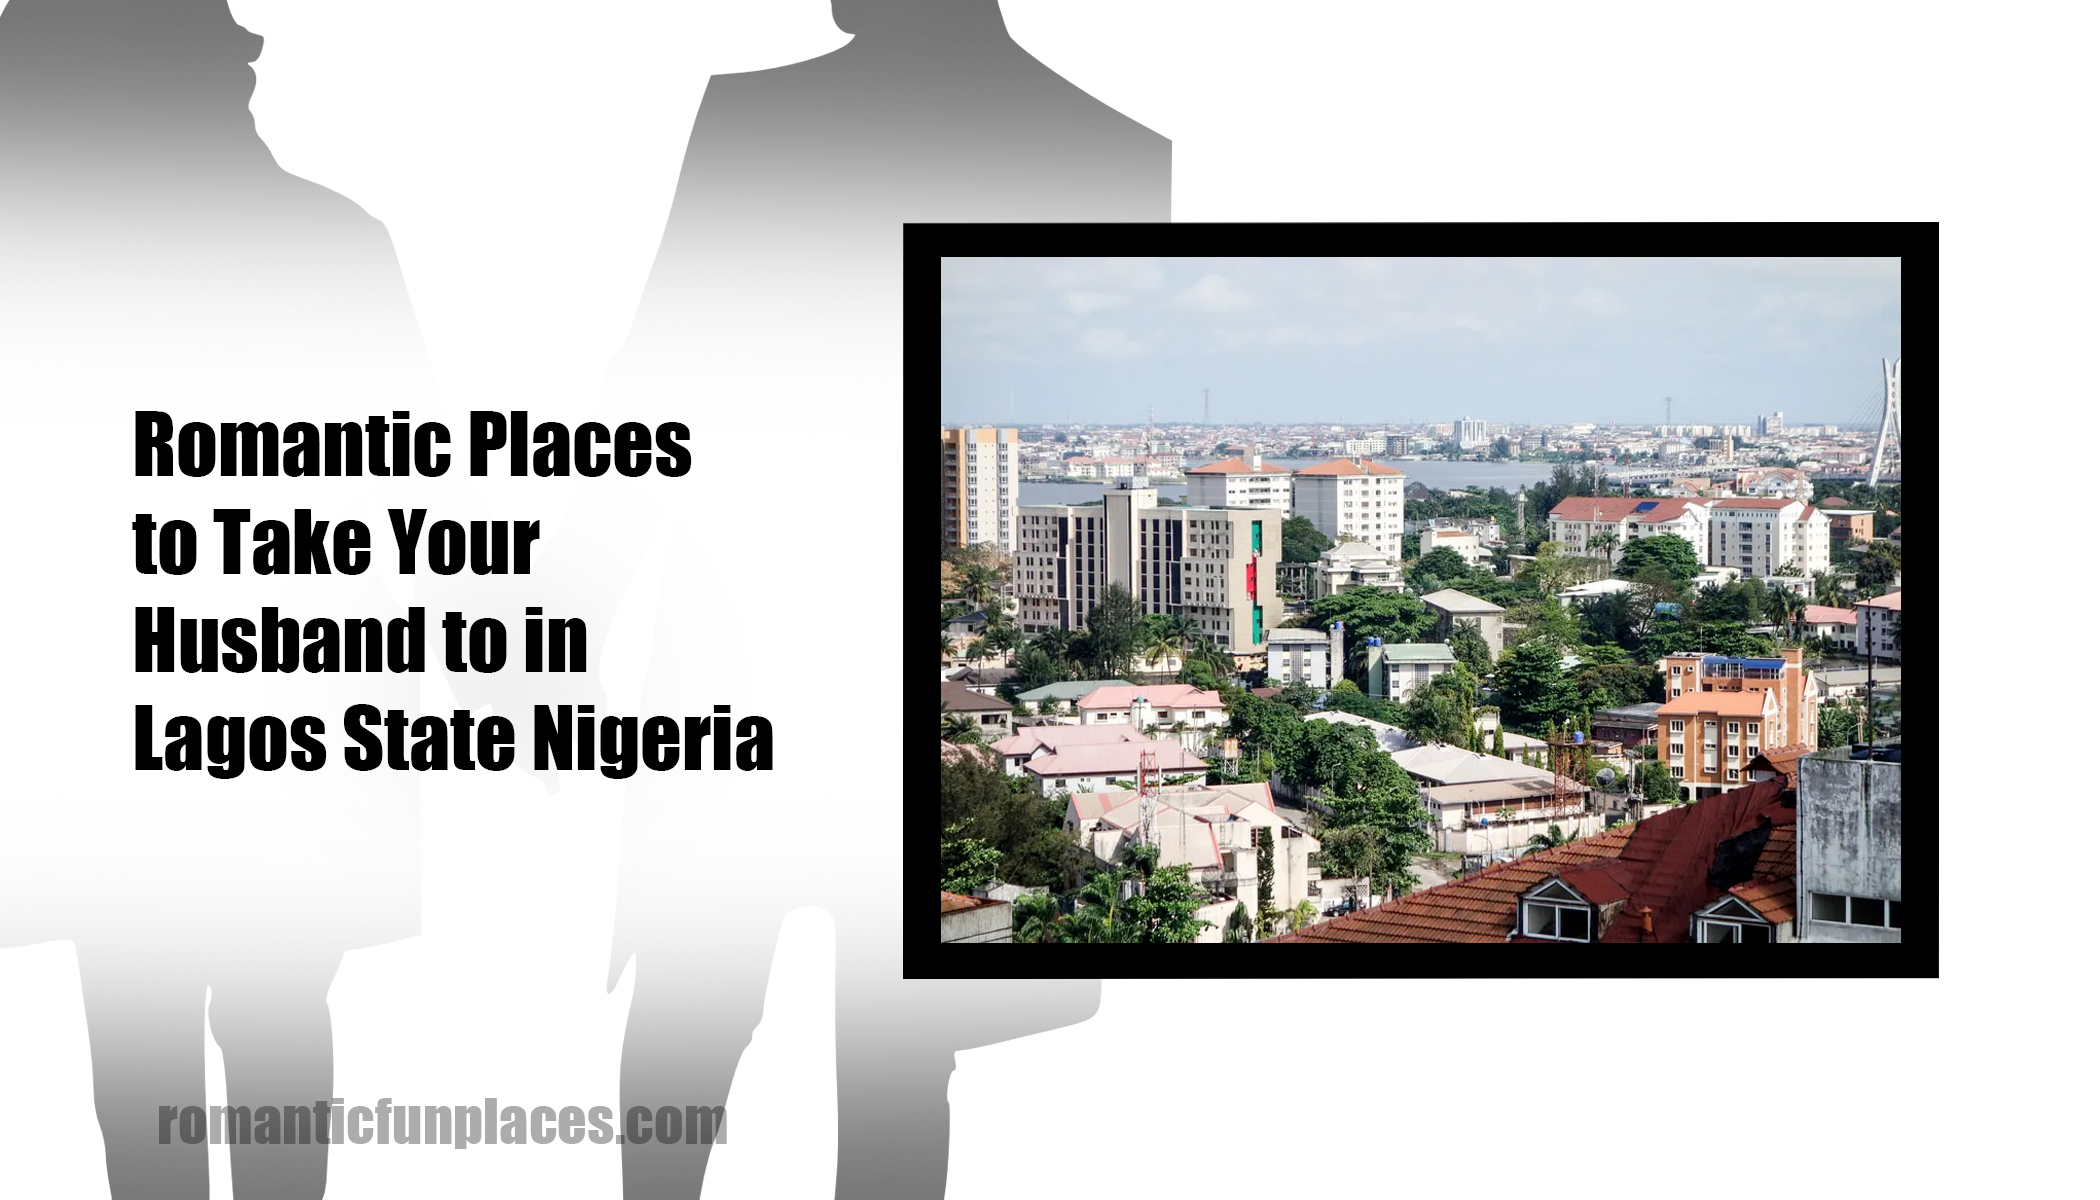 Romantic Places to Take Your Husband to in Lagos State Nigeria